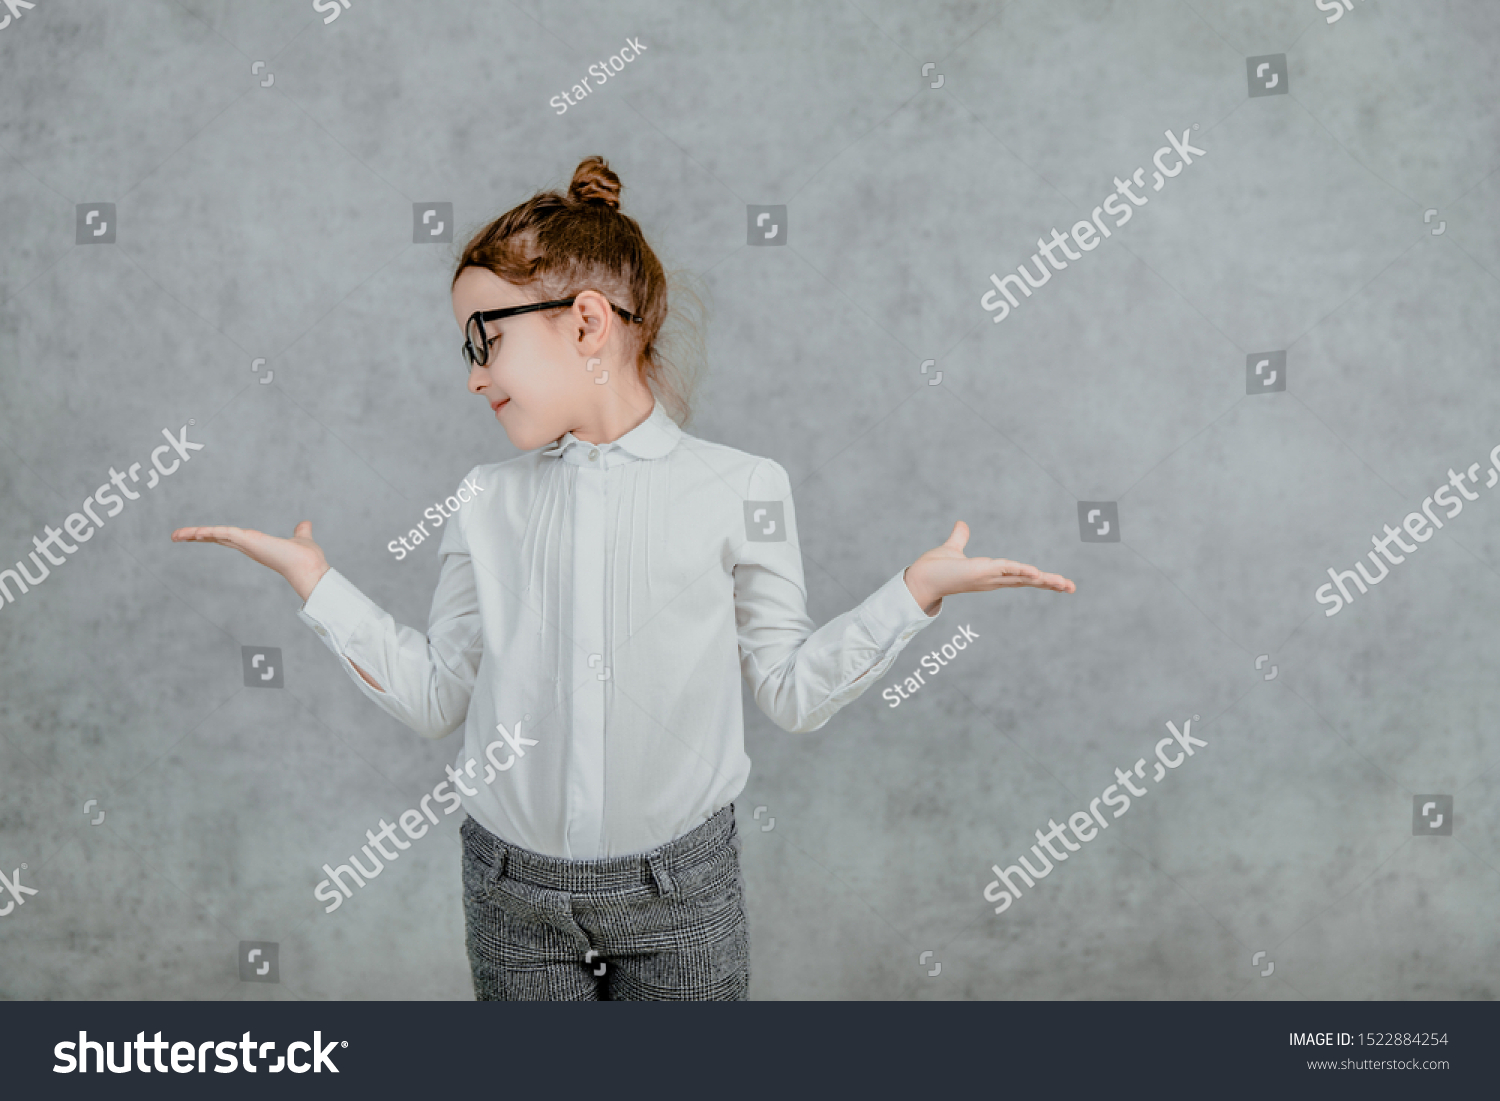 little businesswoman. little businesswoman on yellow background. business lady. little businesswoman with serious and confident look. formal fashion for little businesswoman #1522884254